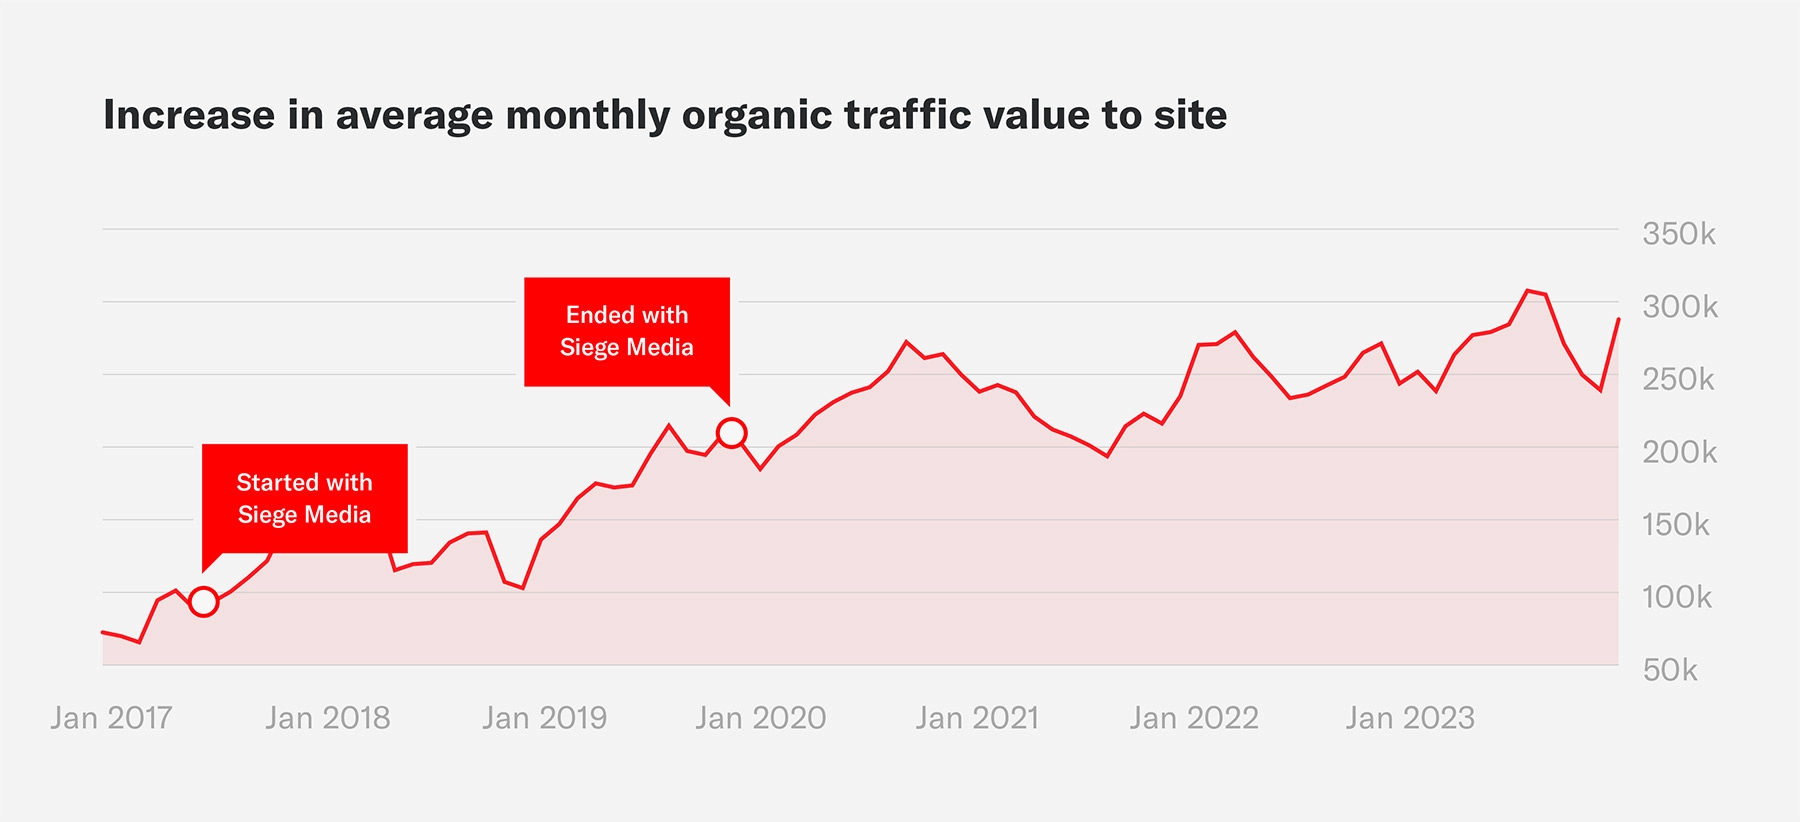 An image showing the website organic traffic value growth for Invaluable when they worked with Siege Media.